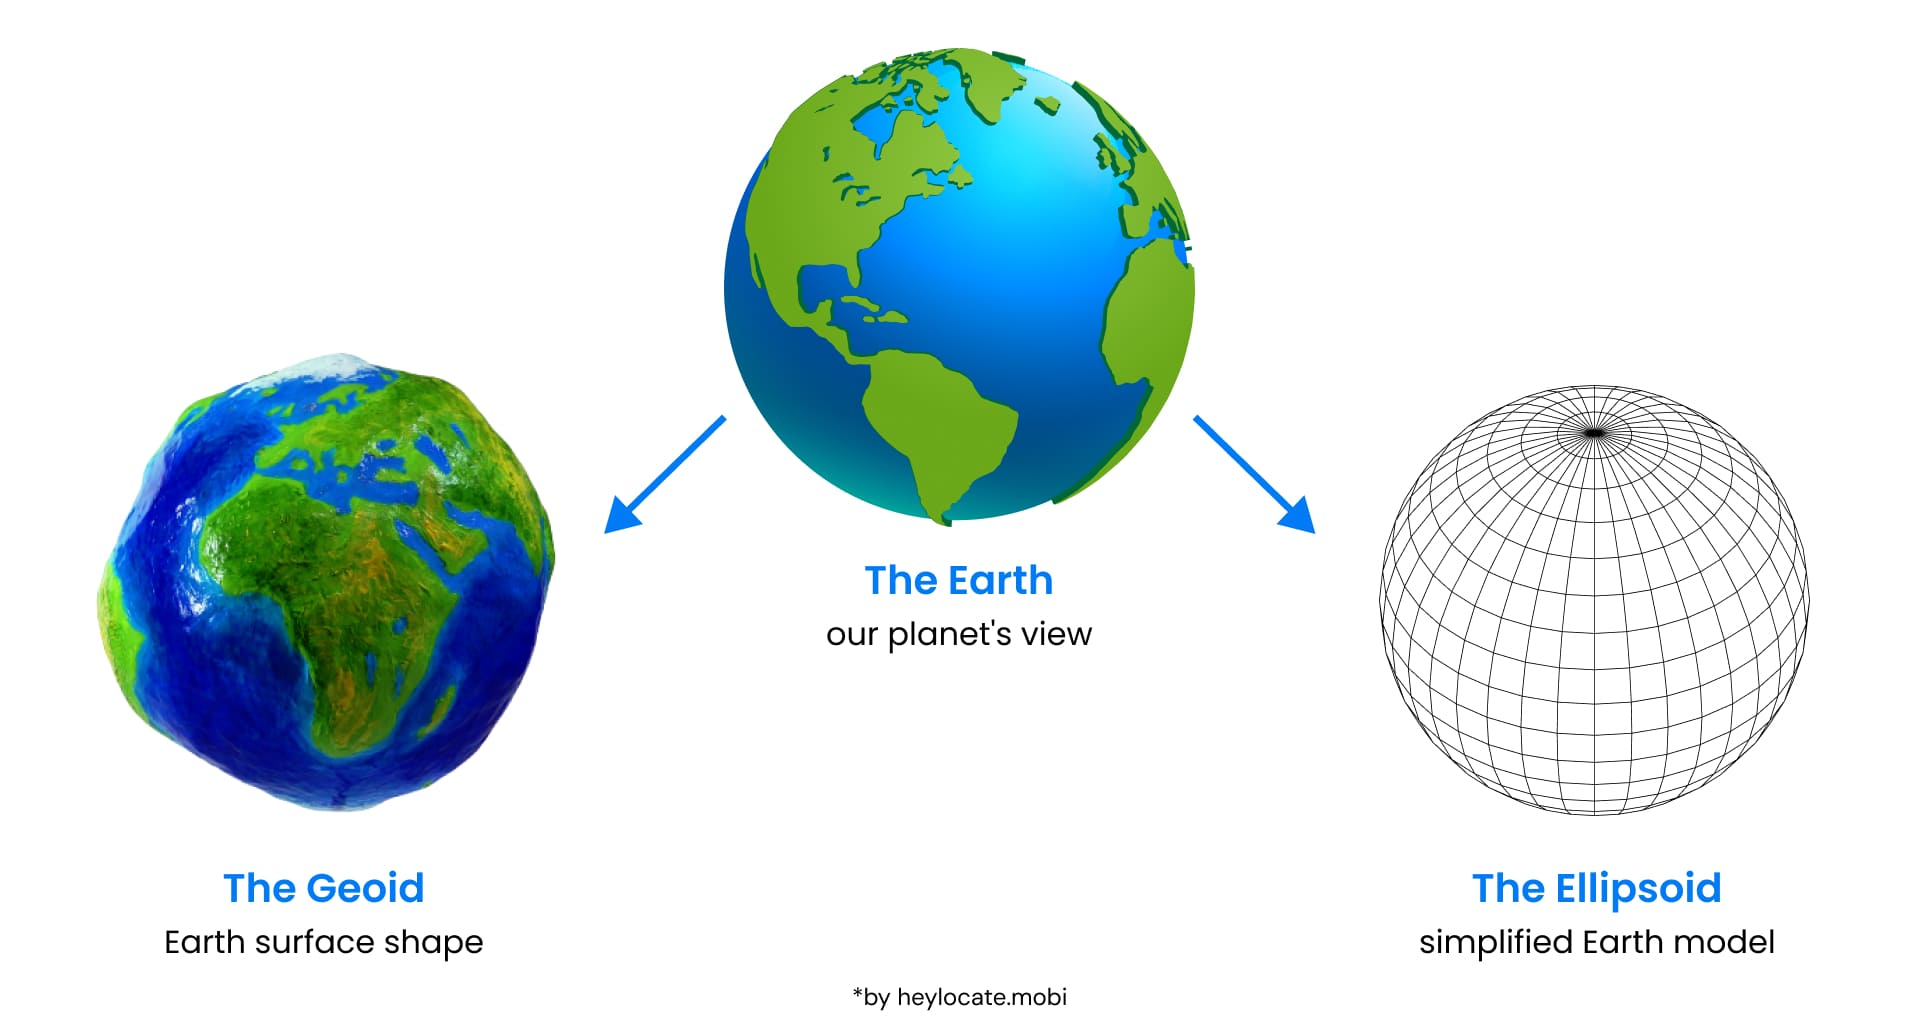 A trio of images comparing the geoid, the actual shape of Earth, and the ellipsoid, a simplified model of Earth used for maps